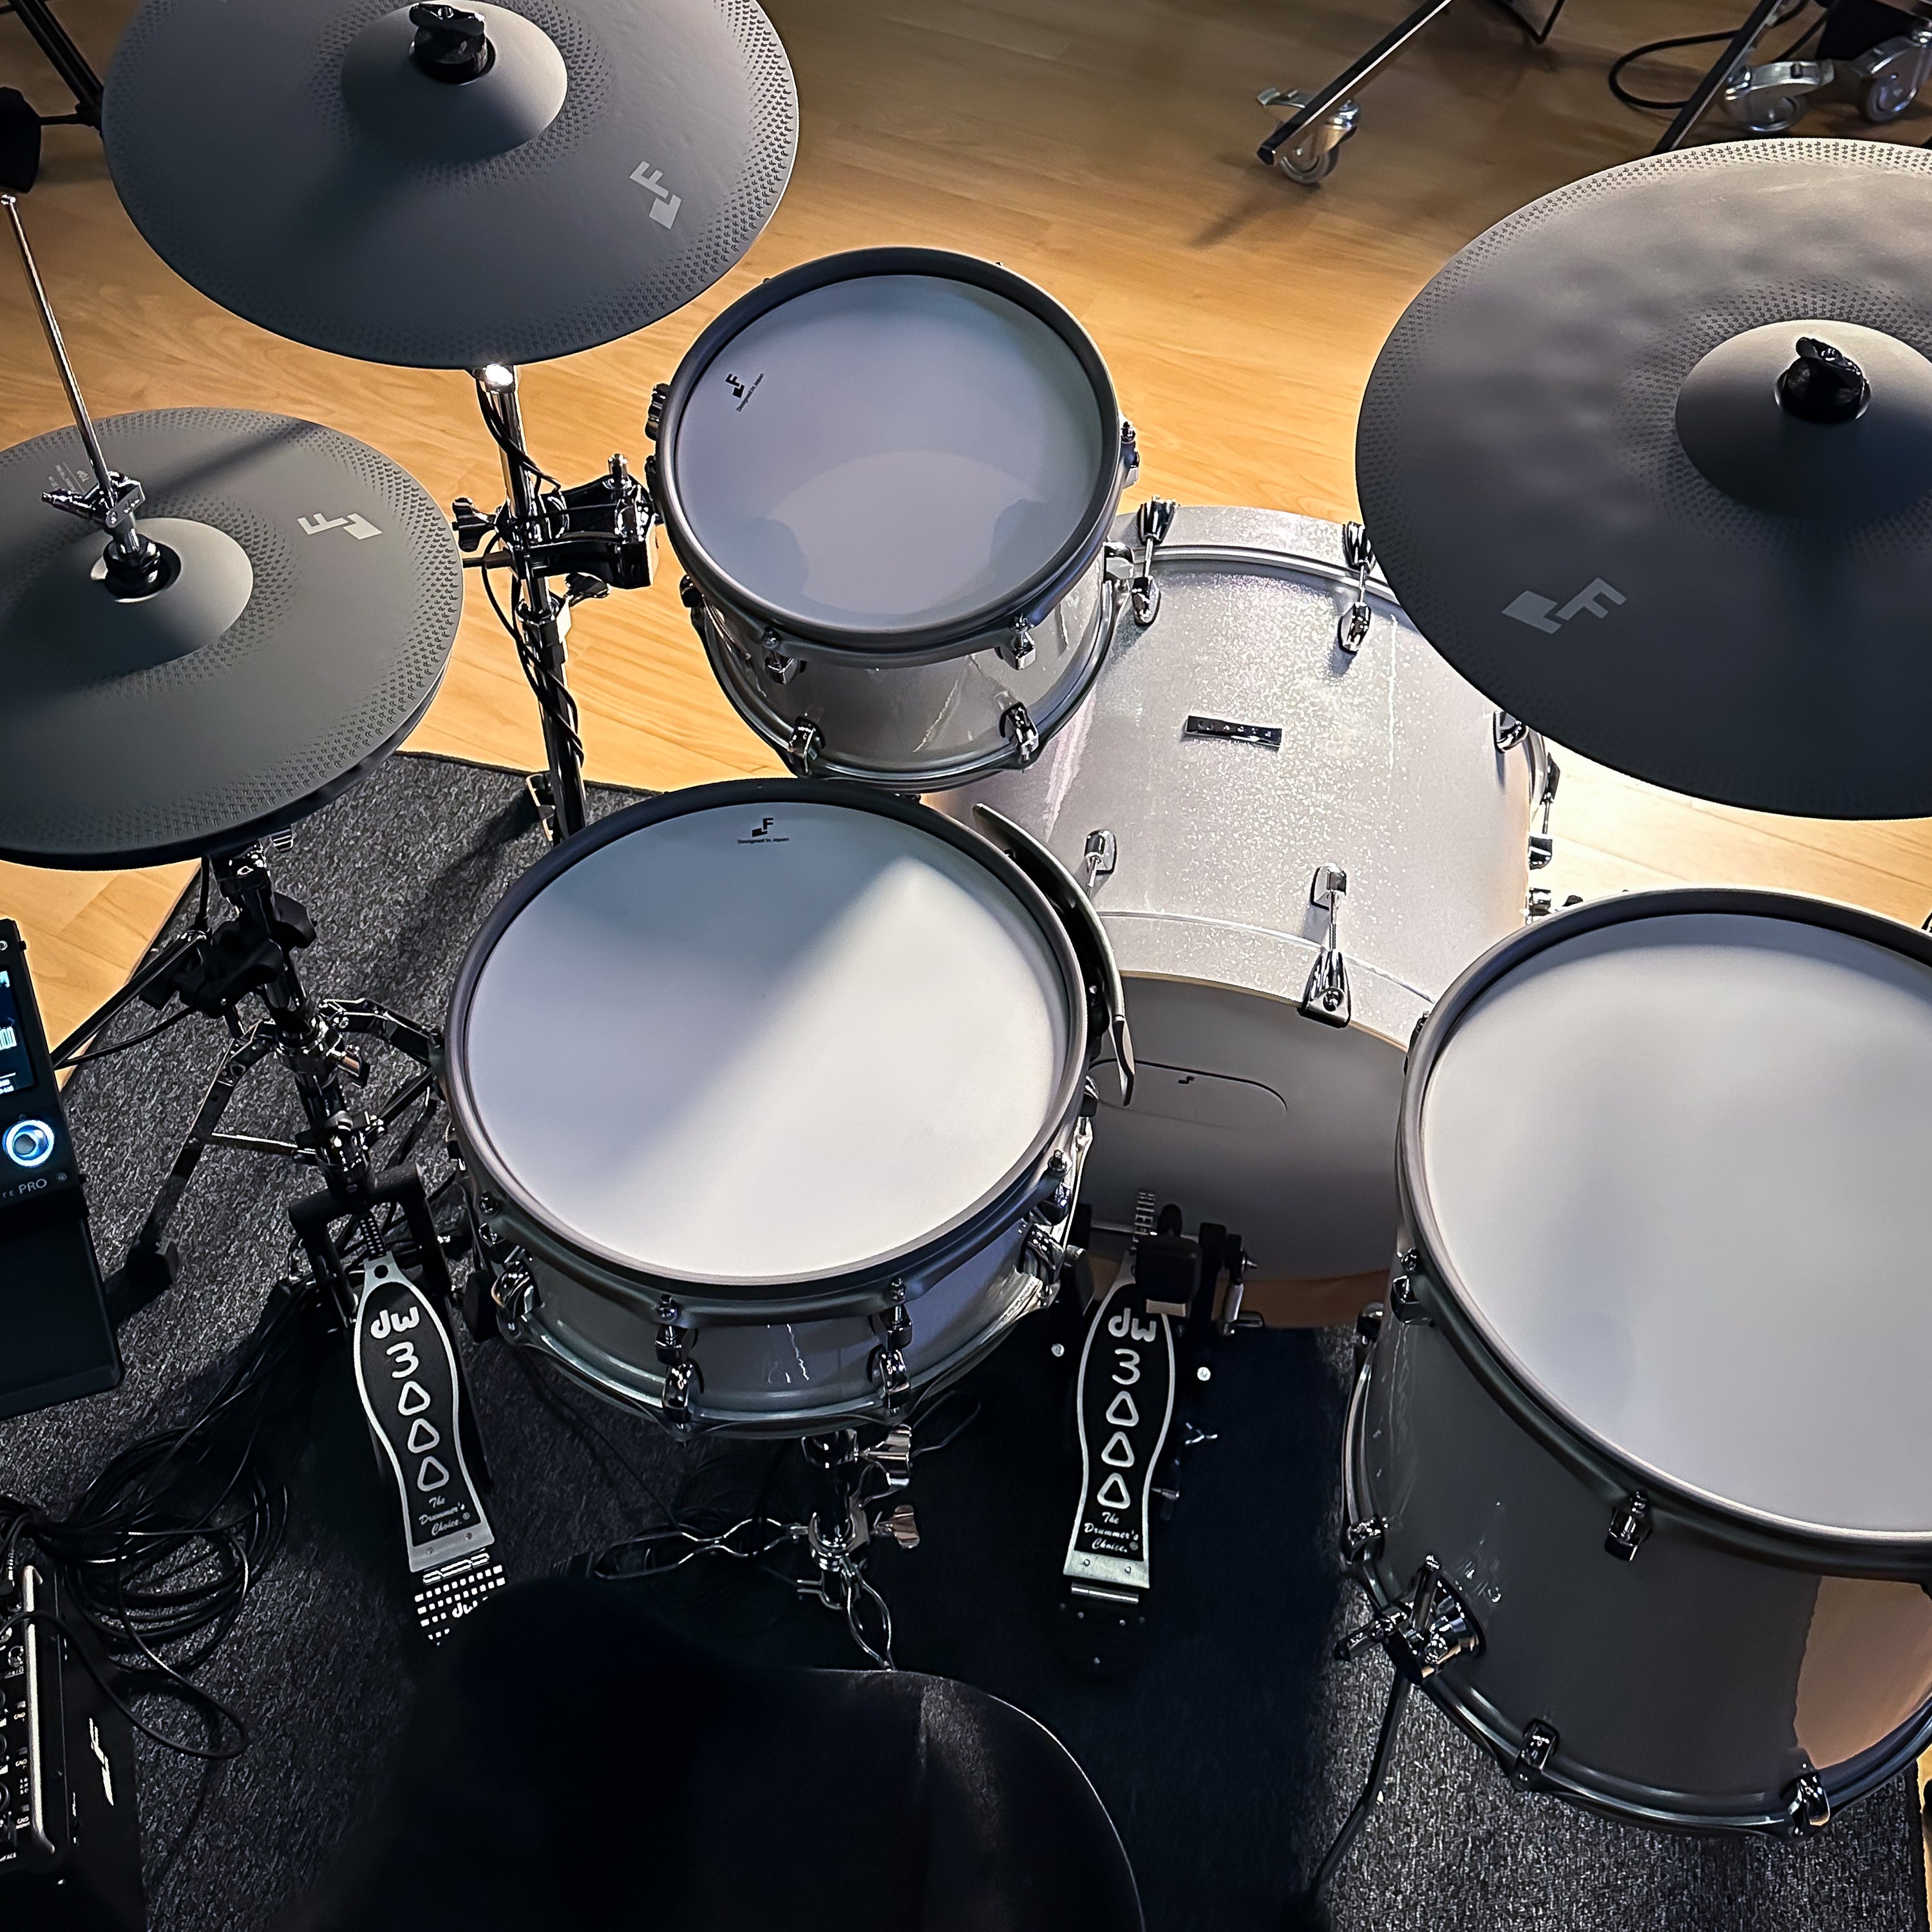 EFNOTE PRO 700 Standard Electronic Drum Kit - from above in a studio